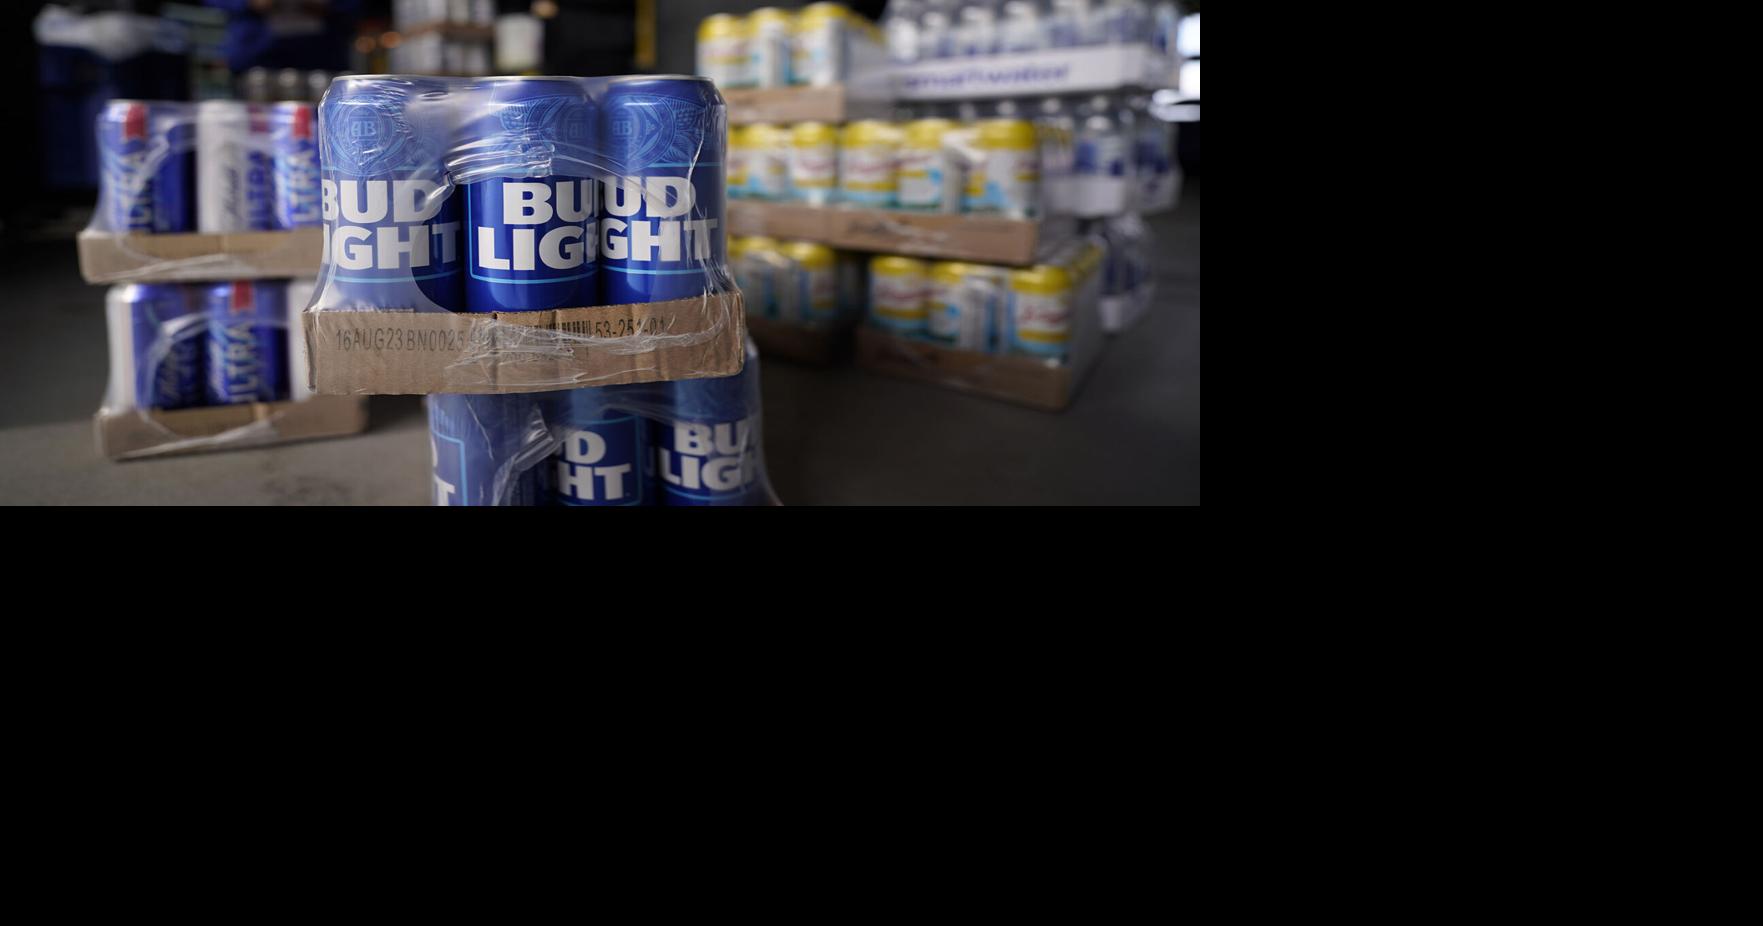 Bud Light sales keep slipping, but it remains America's top-selling beer